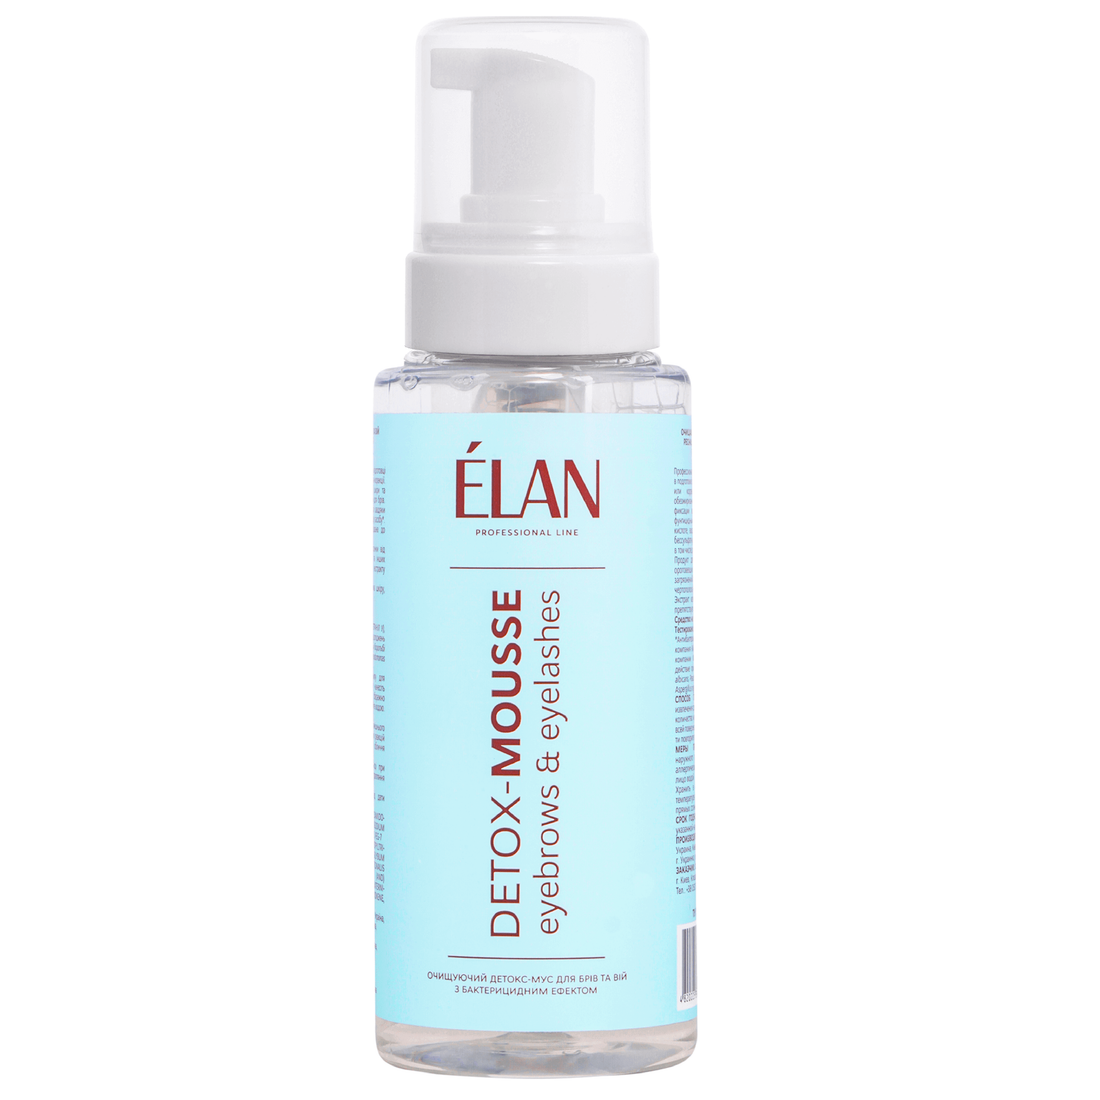 ÉLAN - Cleansing Detox-Mousse for Eyebrows and Eyelashes, 150ml